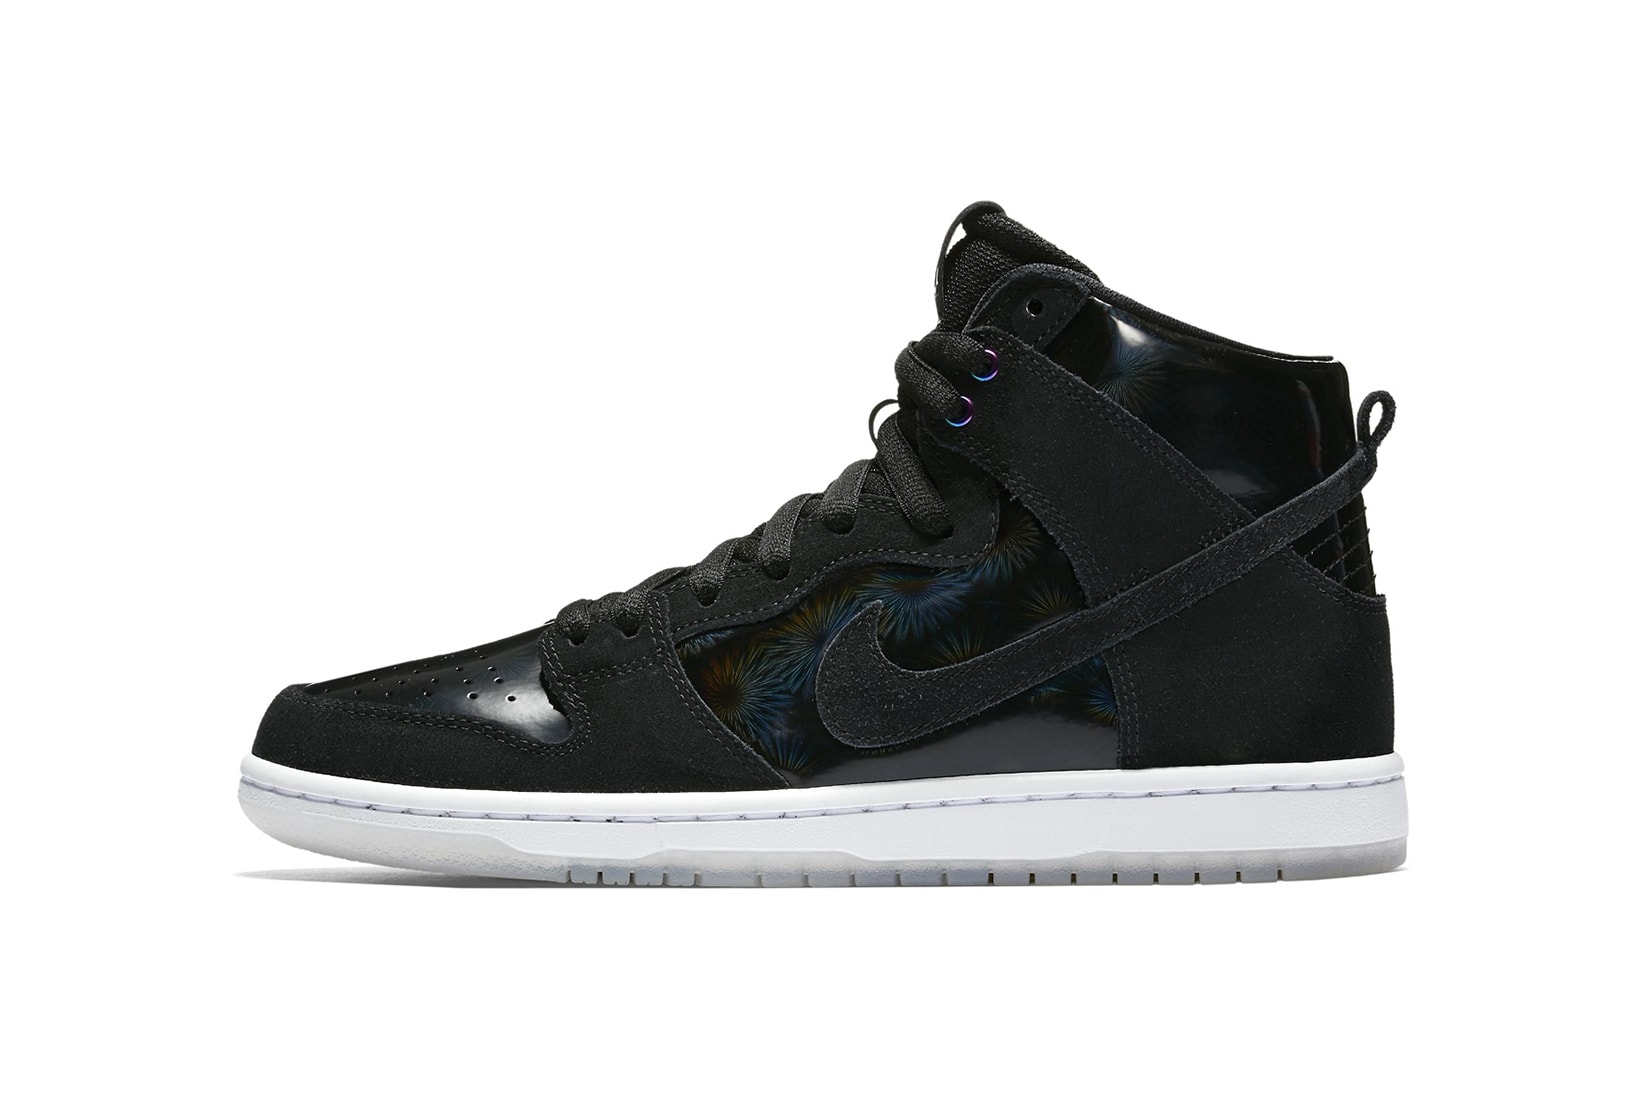 Nike SB Dunk High Holographic Black White Sneakers Shoes Footwear 2017 Summer Release Date Info